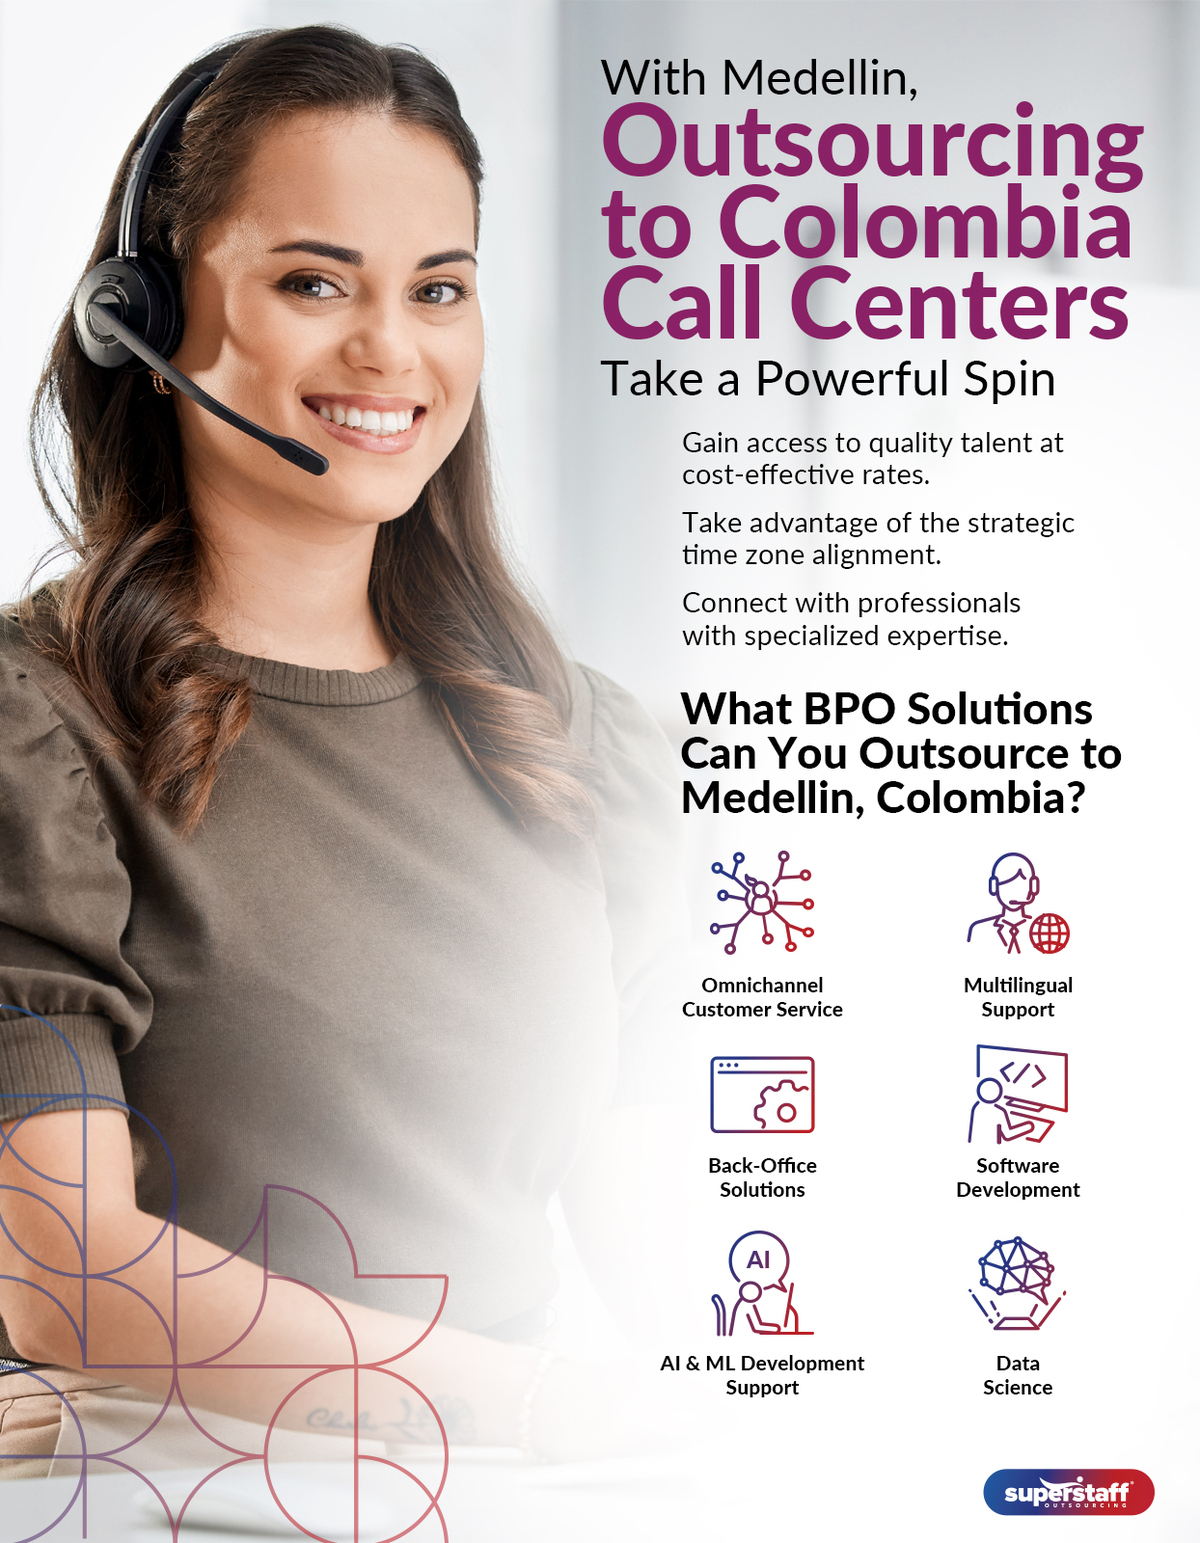 A mini infographic shows benefits of outsourcing to call centers in Medellin, Colombia.